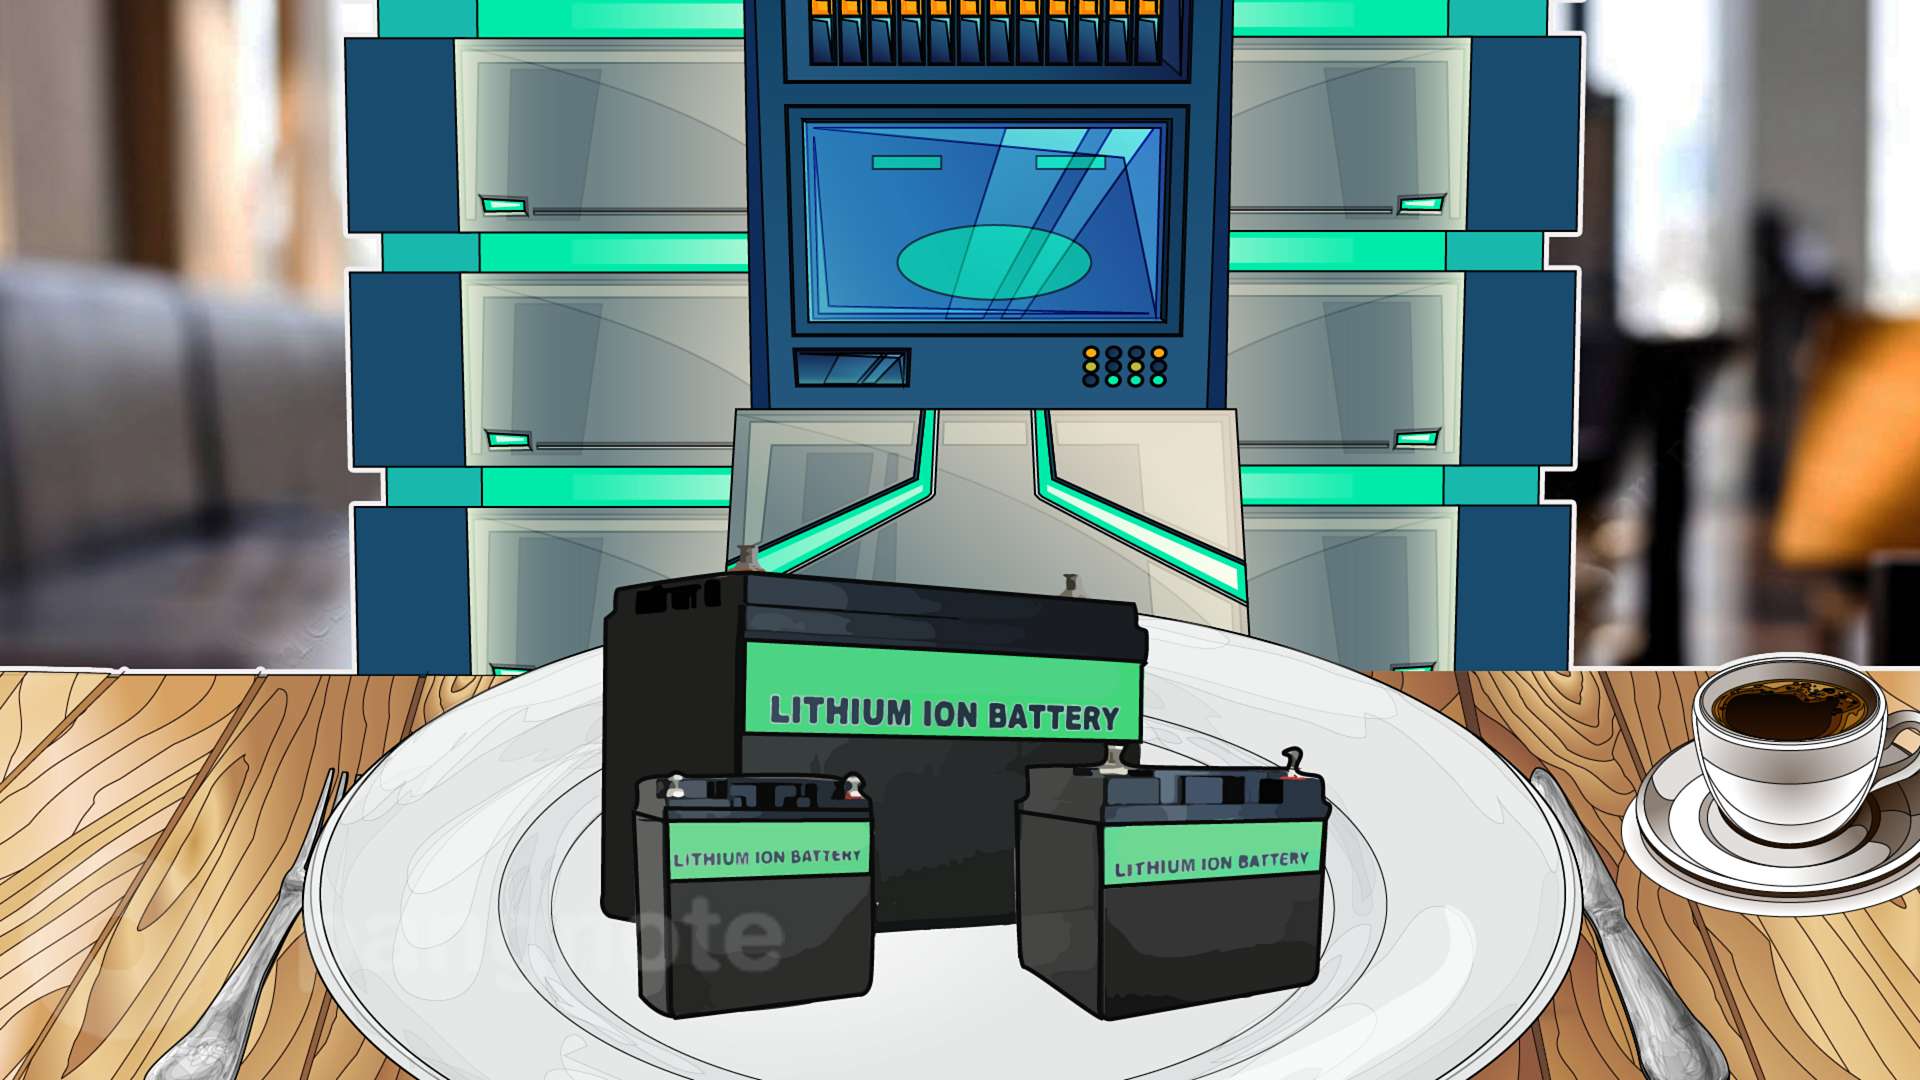 Lithium-ion batteries as UPS in the data center